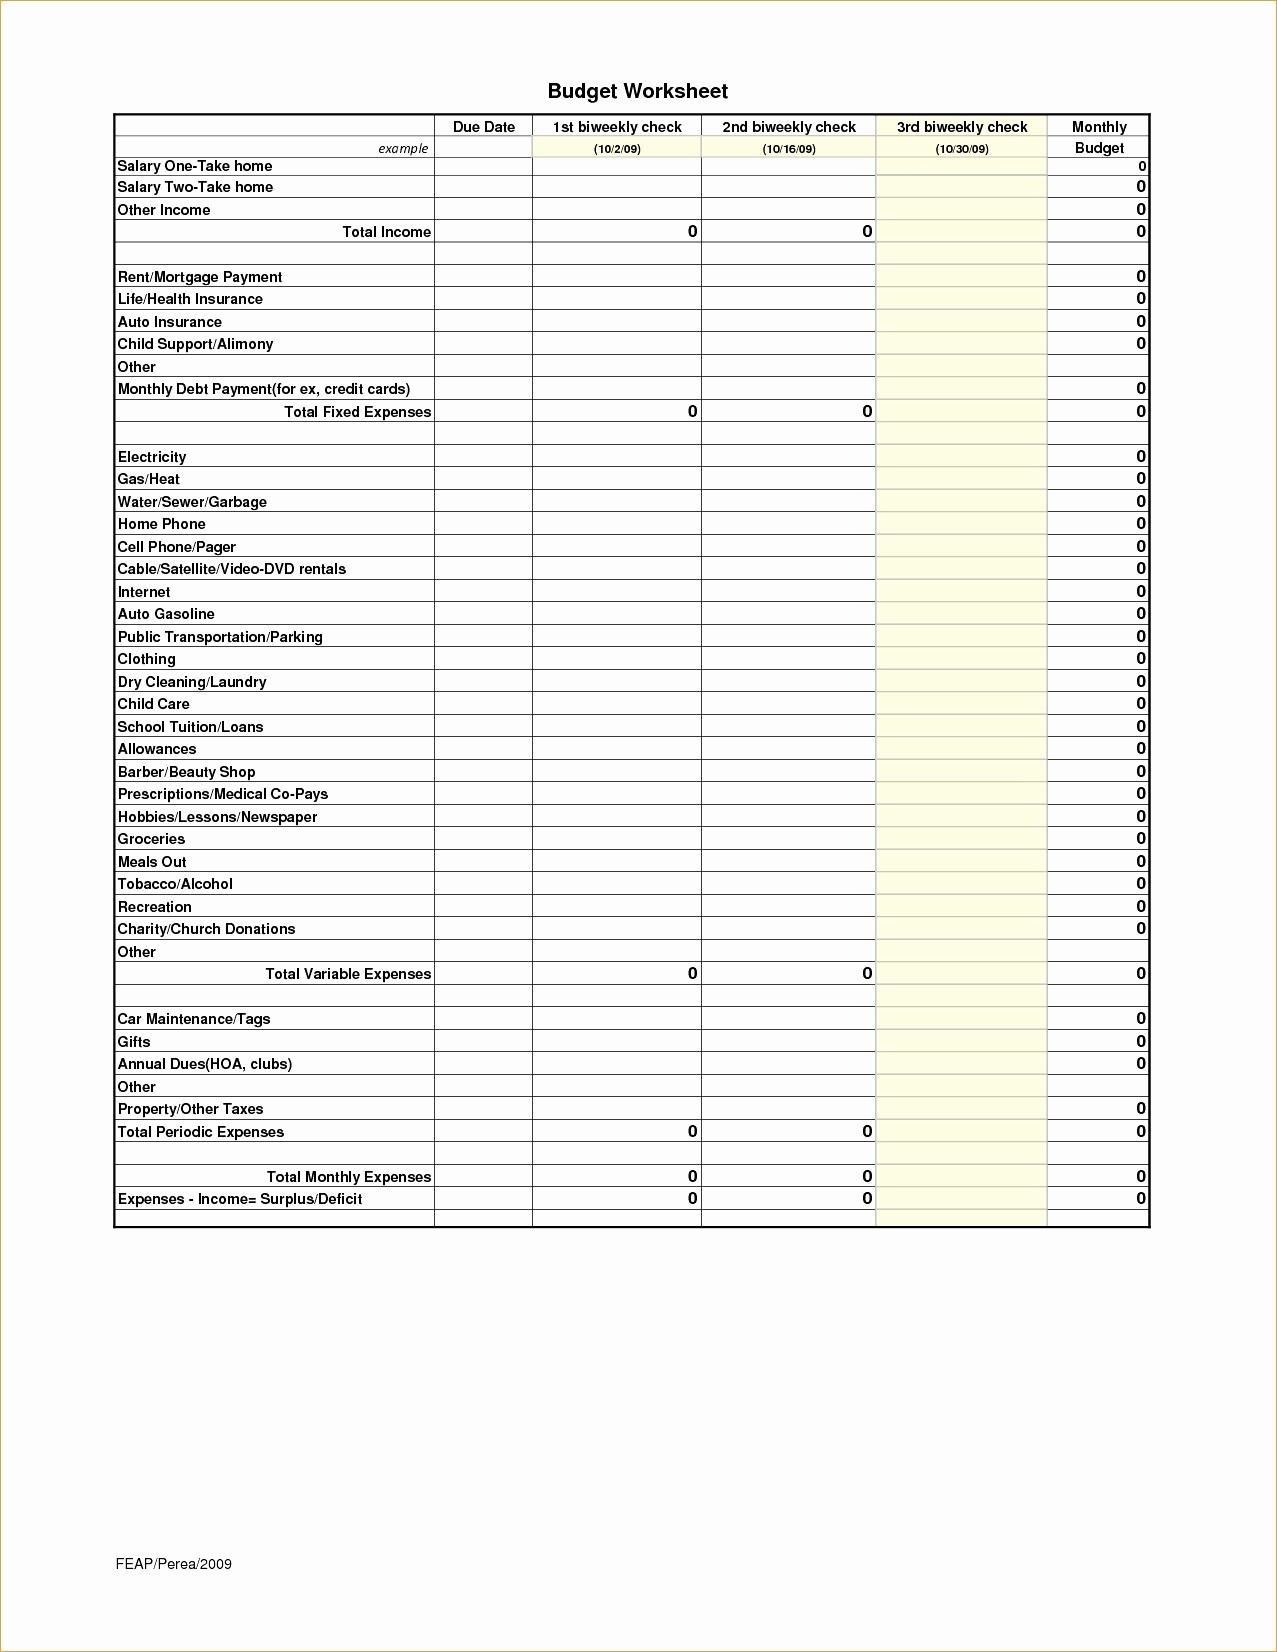 Goodwill Donation Valuation Worksheet Awesome Document Values Spreadsheet